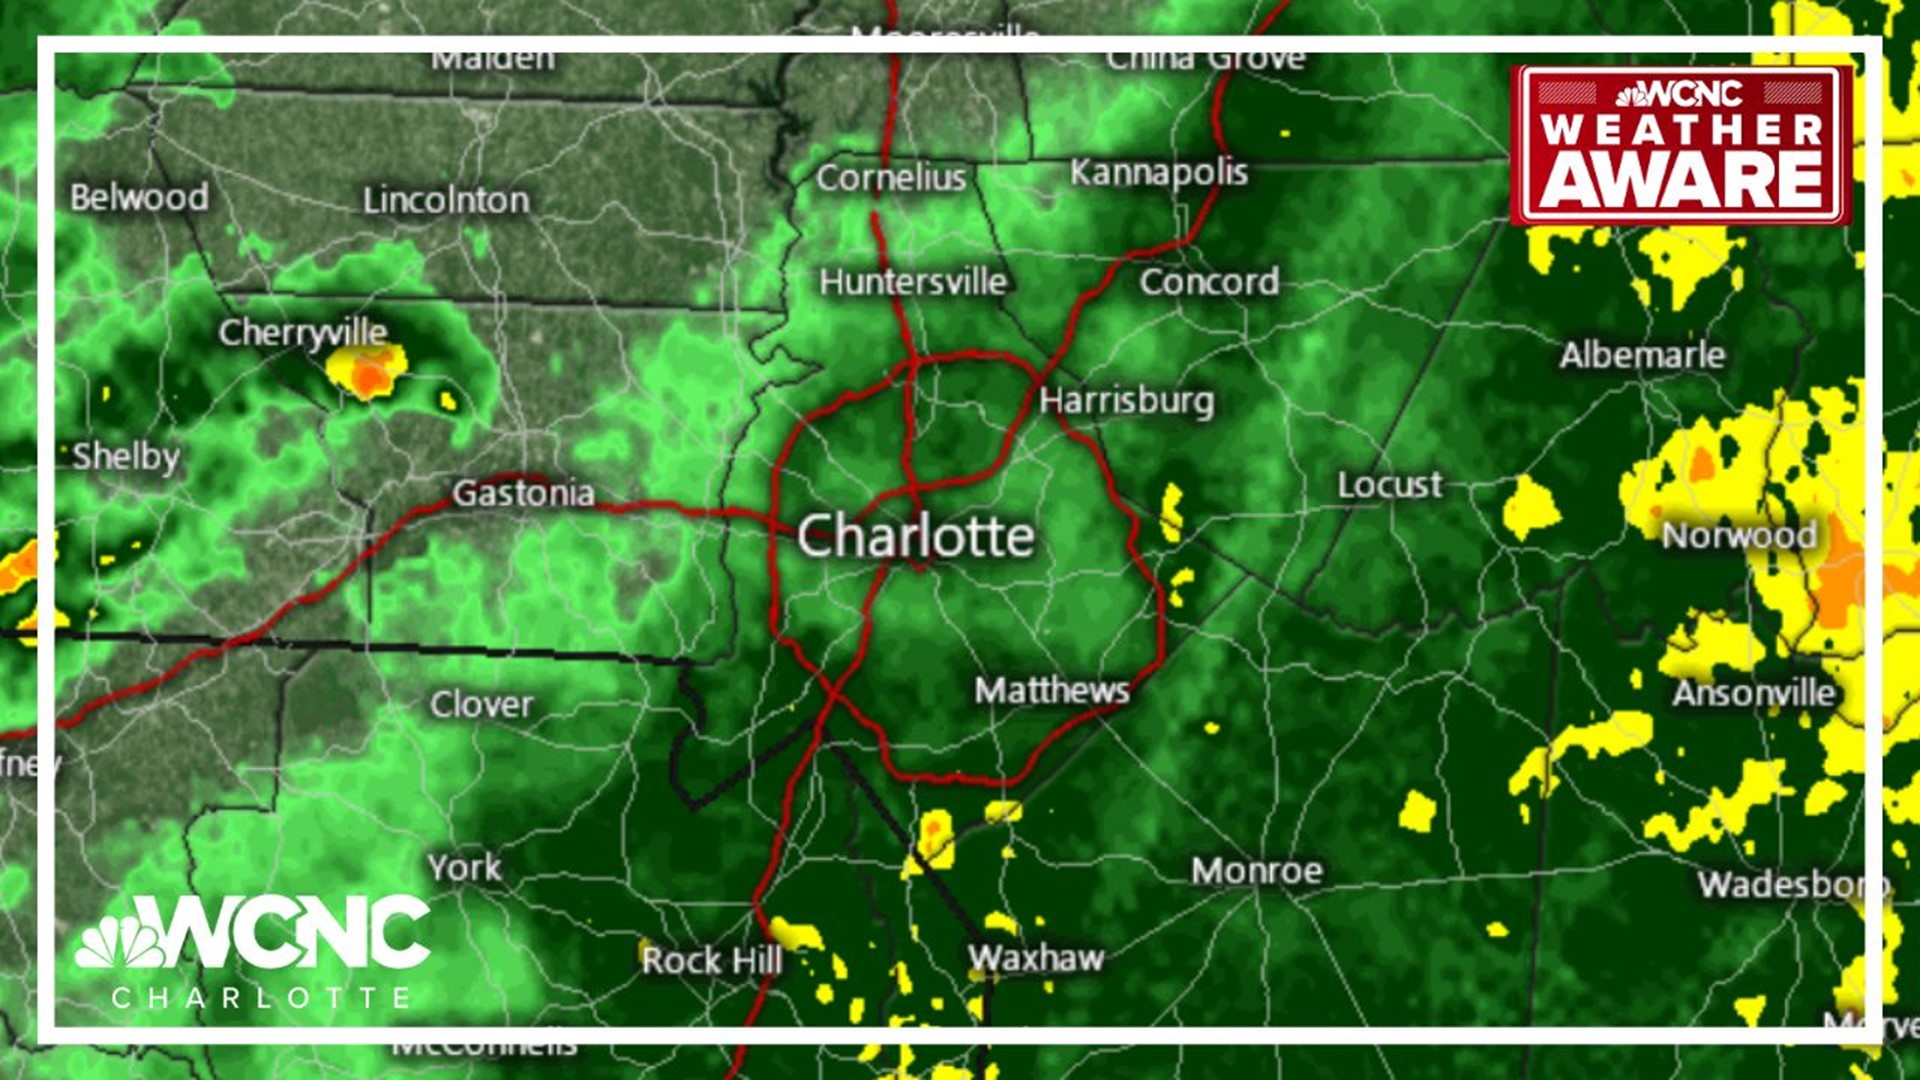 Wednesday morning got off to a stormy start with periods of heavy rain and gusty winds in the Charlotte area.